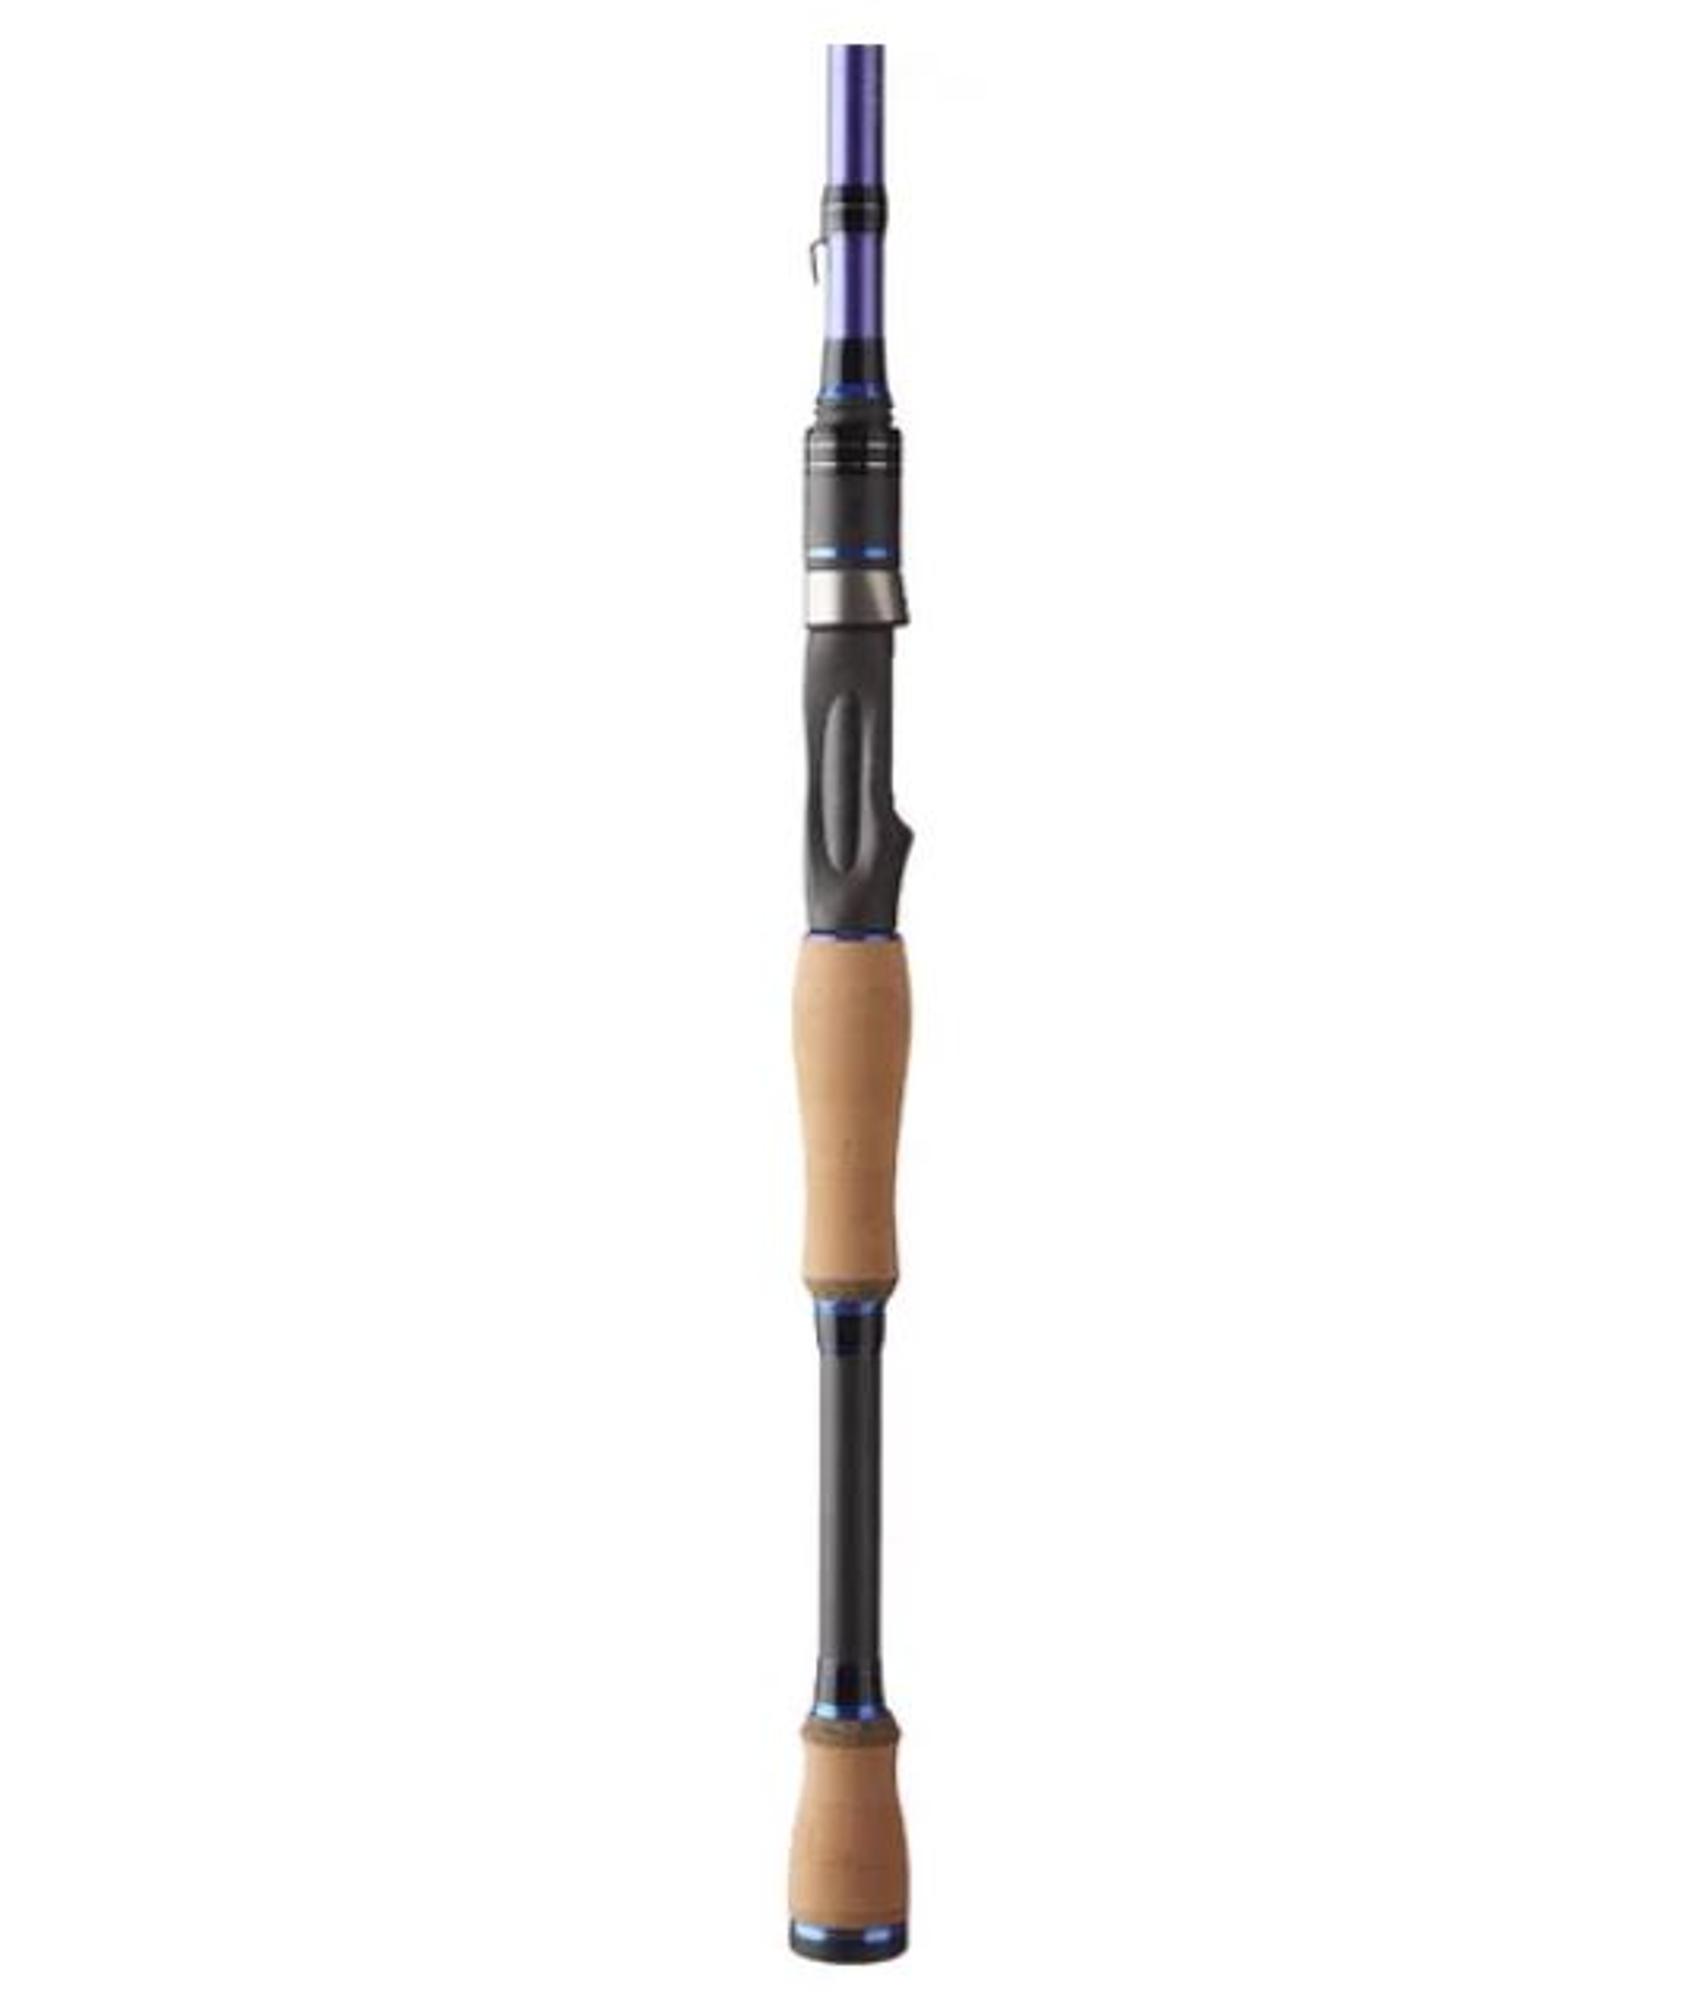 Endurance 724 7ft 4in Medium Moderate Fast | 857489005657 | POWELL RODS | Fishing | Rods | Casting